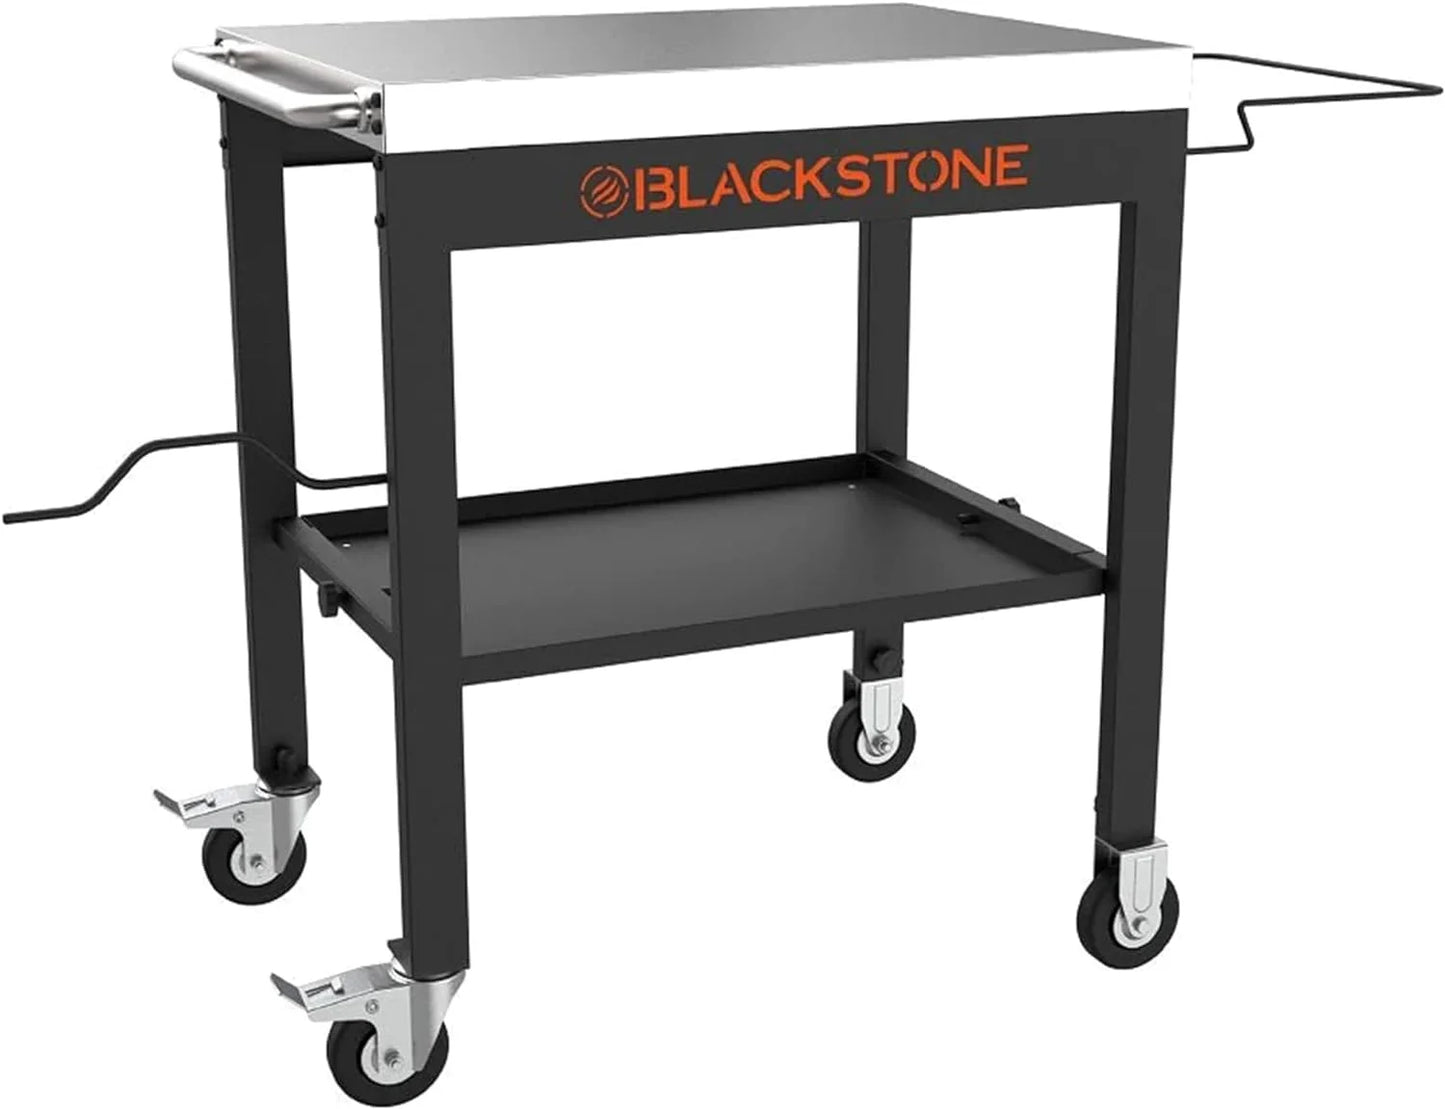 22 Inch Blackstone Griddle with Lid, Nonstick On The Go Tabletop Gas Griddle Outdoor Grill Combo with Blackstone Portable Prep Table, Blackstone Accessories, Seasoning and Wholesalehome Gloves & Cloth